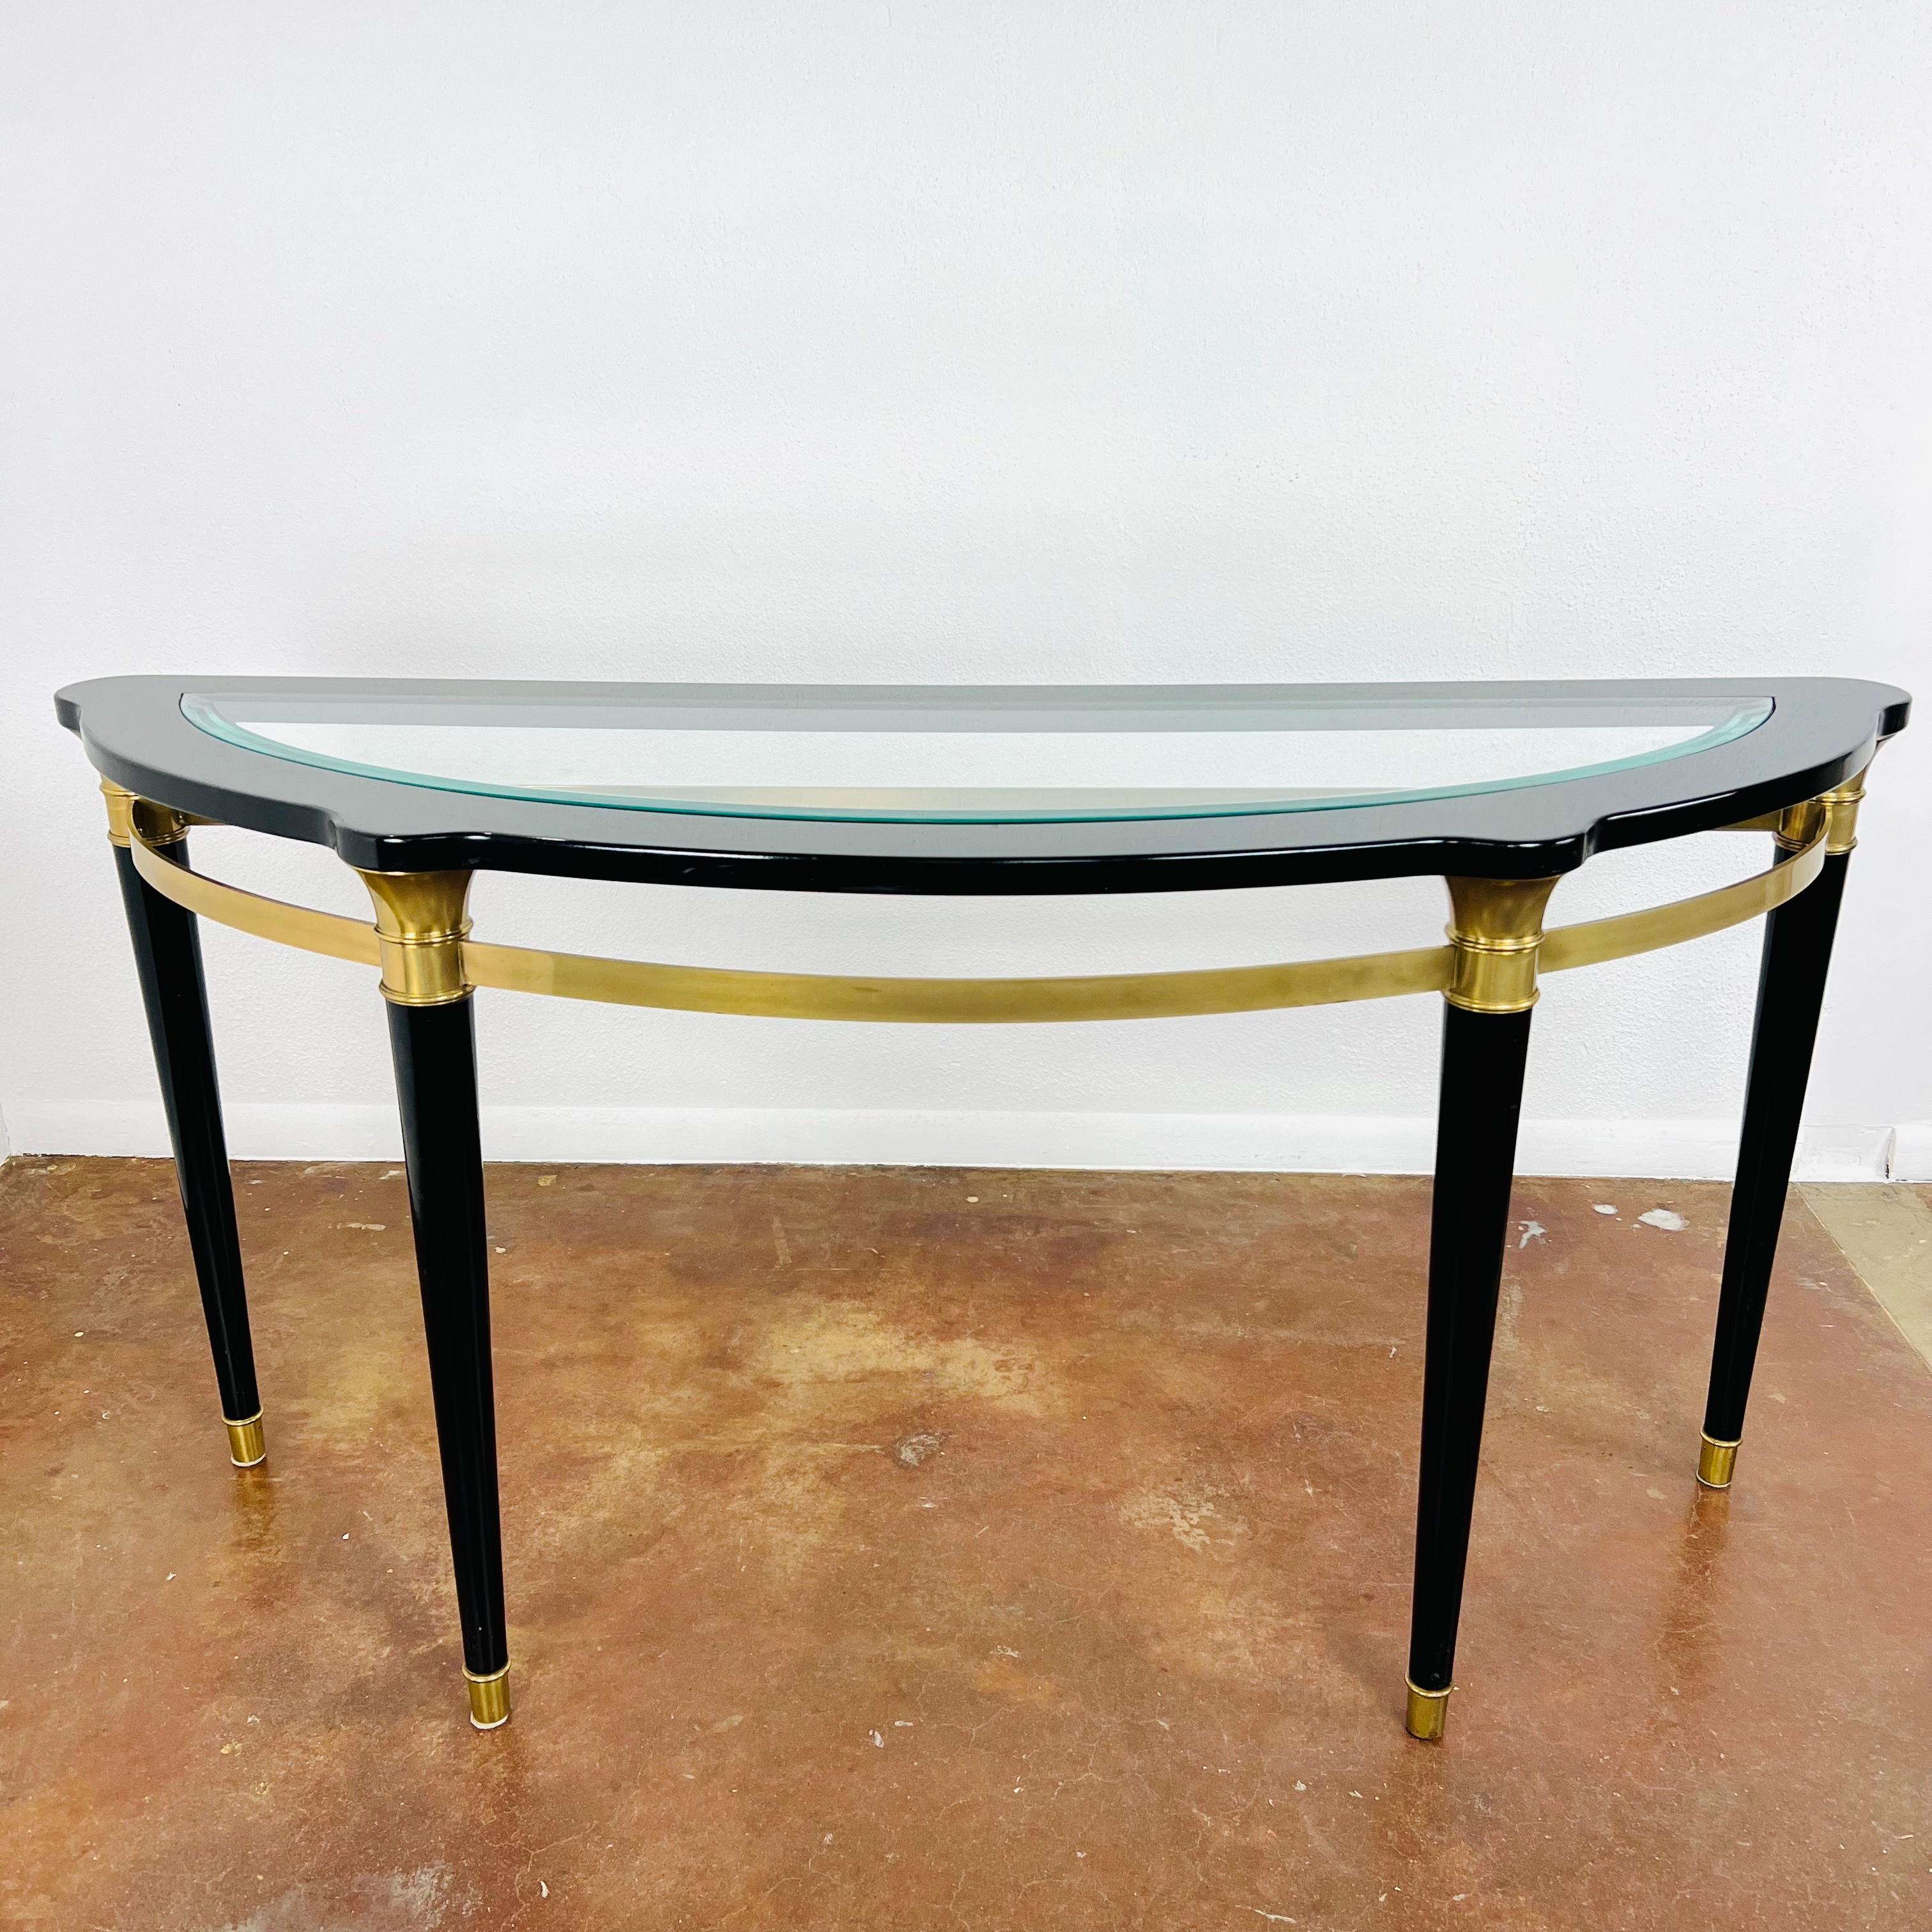 Hollywood Regency Style Demi-Lune Console Table with Glass Top and brass trim. Small chip at edge of glass and minor dings on legs (see photos for details).